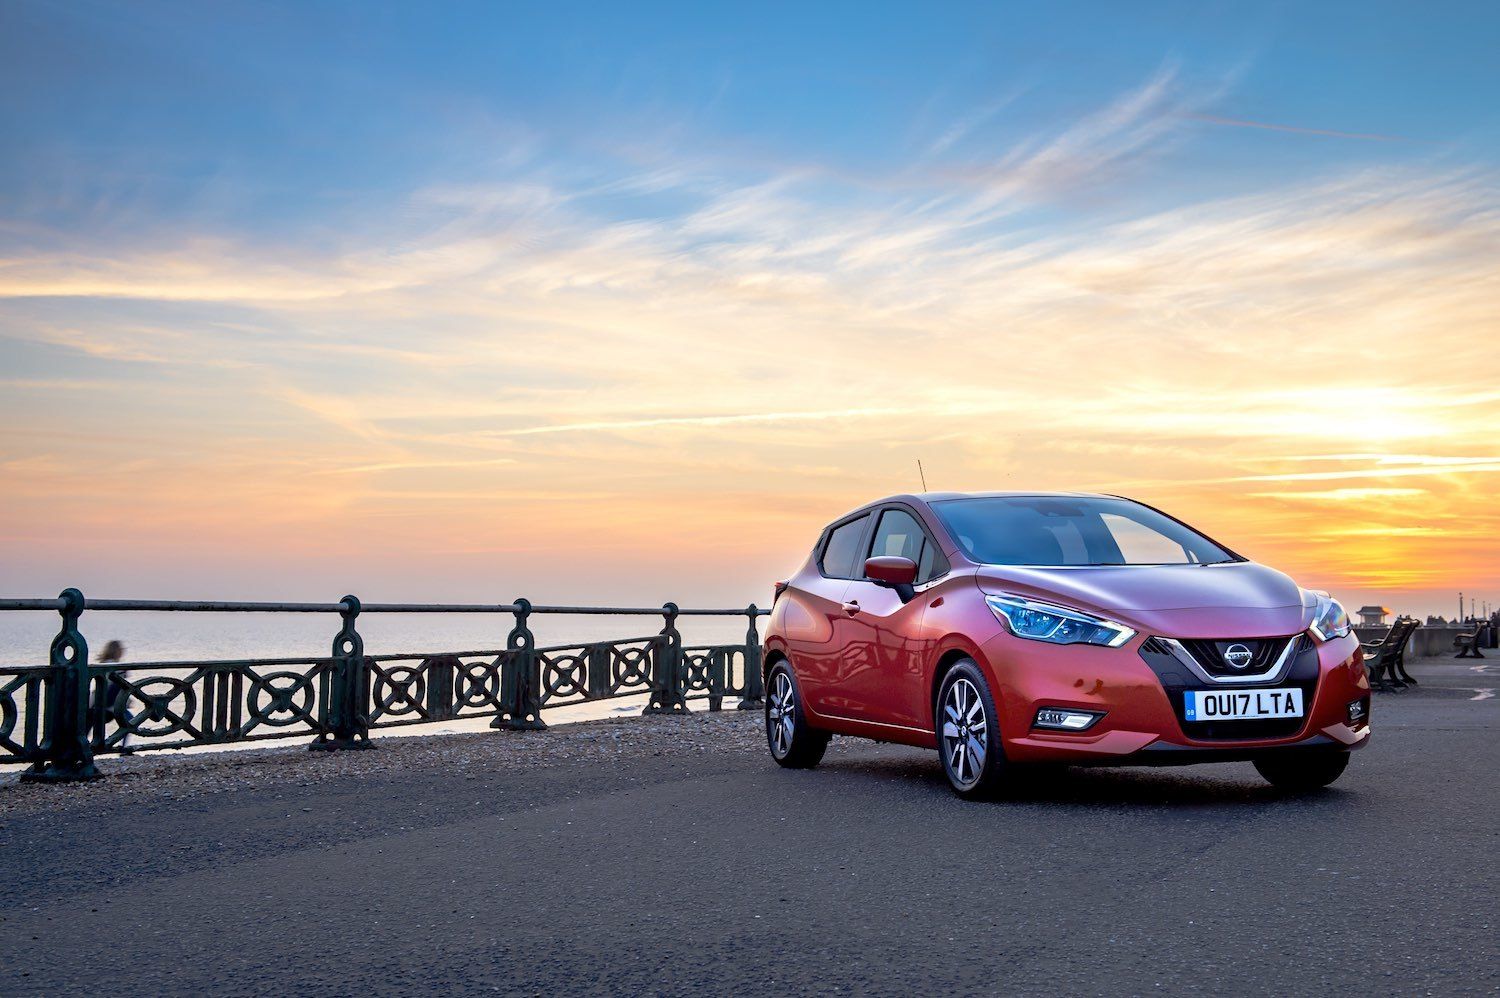 Tom Scanlan drives the All New Nissan Micra 13